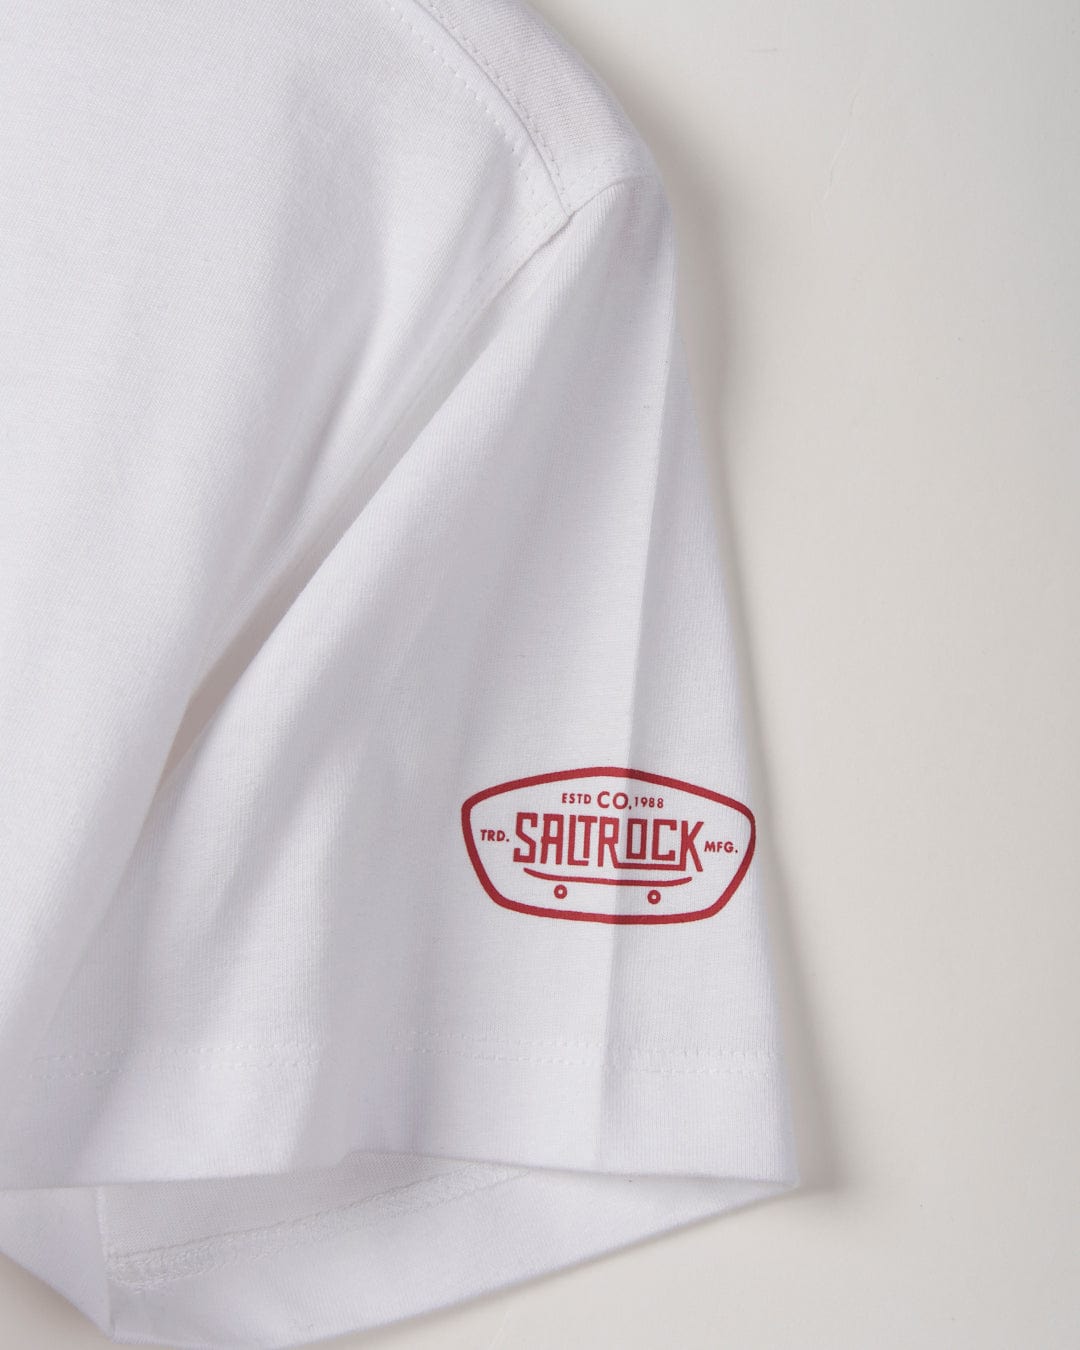 Close-up of a white Taco Tok - Kids Short Sleeve T-Shirt sleeve with a red and white Saltrock logo printed on it, against a plain background.